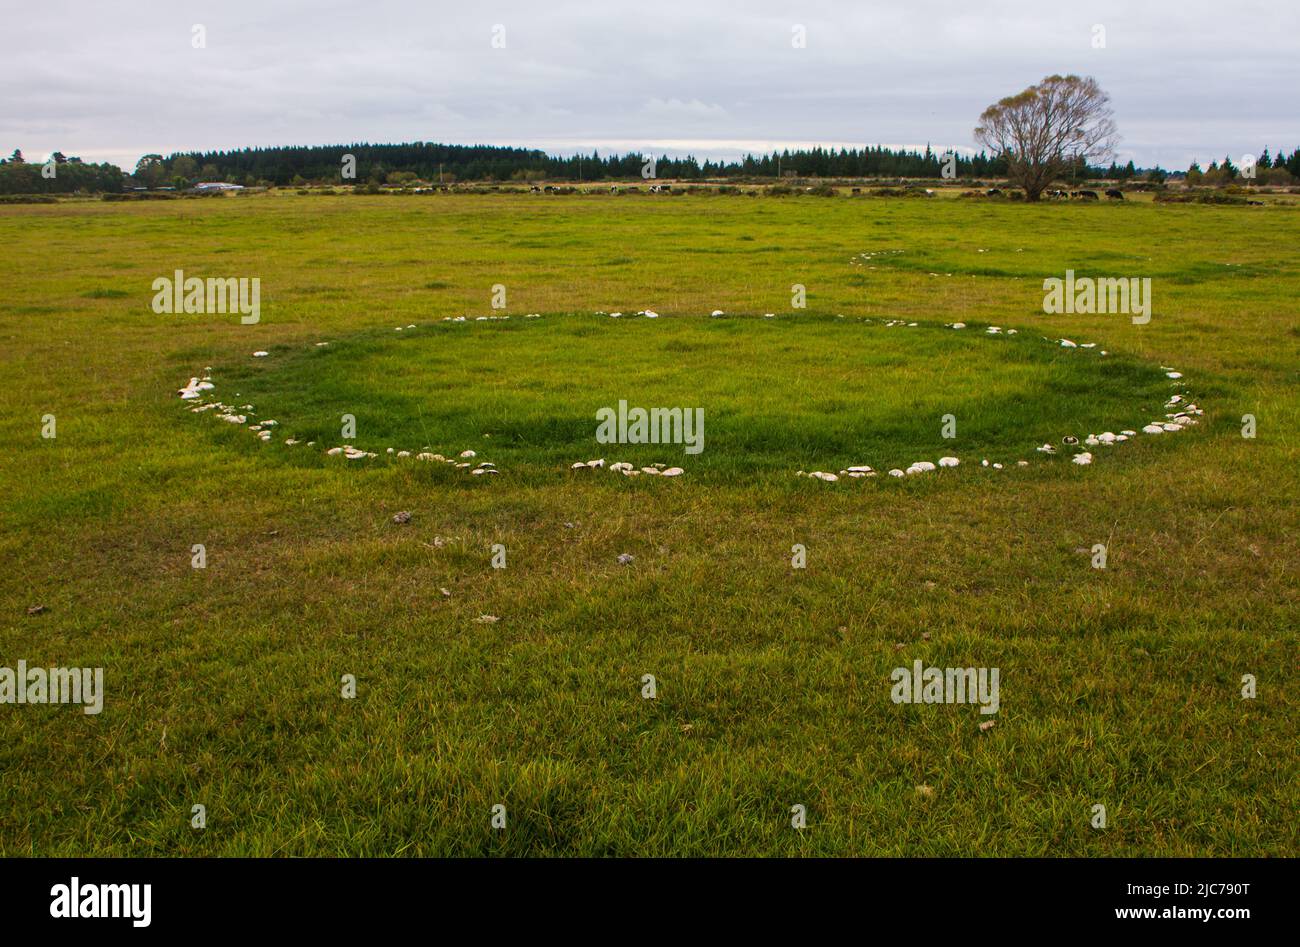 Life in New Zealand. Fishing, foraging, diving, gardening and sports. Fairy rings of Horse Mushrooms (Agaricus arvensis). Stock Photo